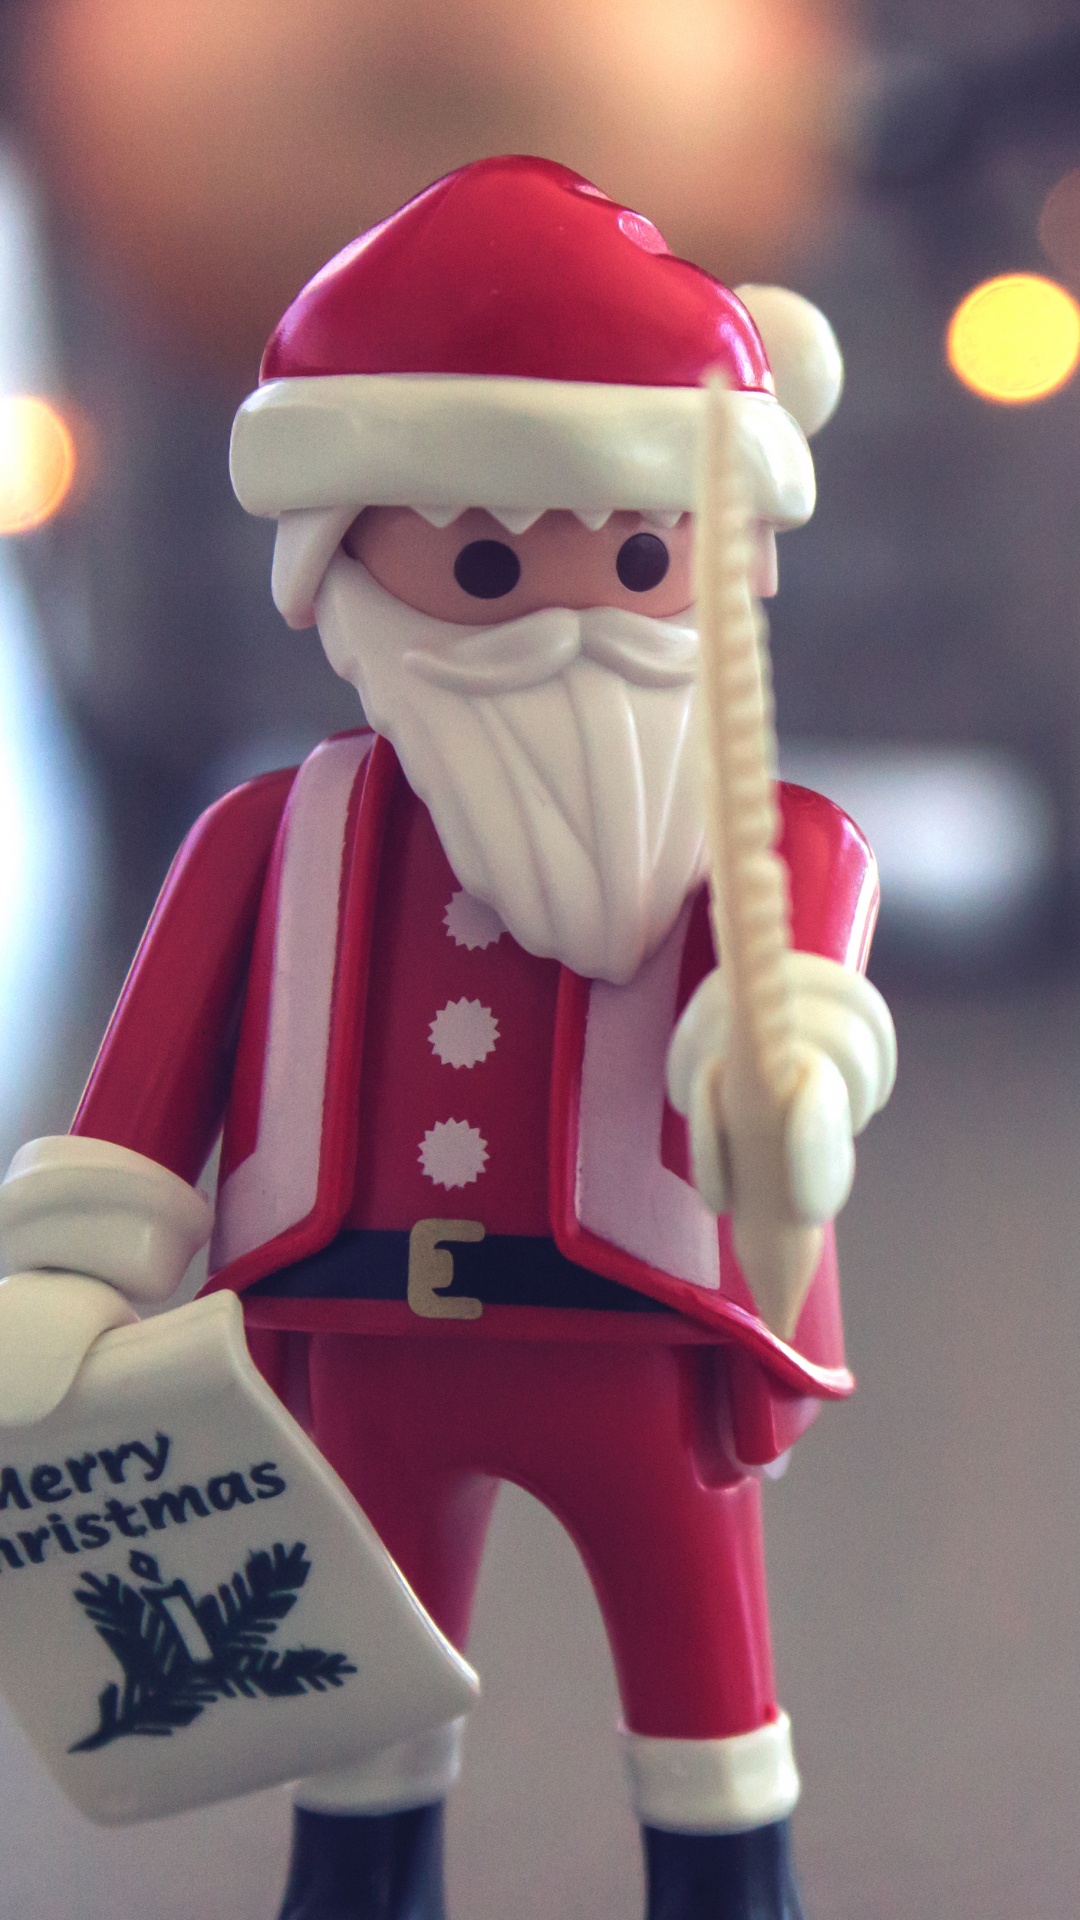 Santa Claus, Christmas Day, Figurine, Toy, Christmas. Wallpaper in 1080x1920 Resolution